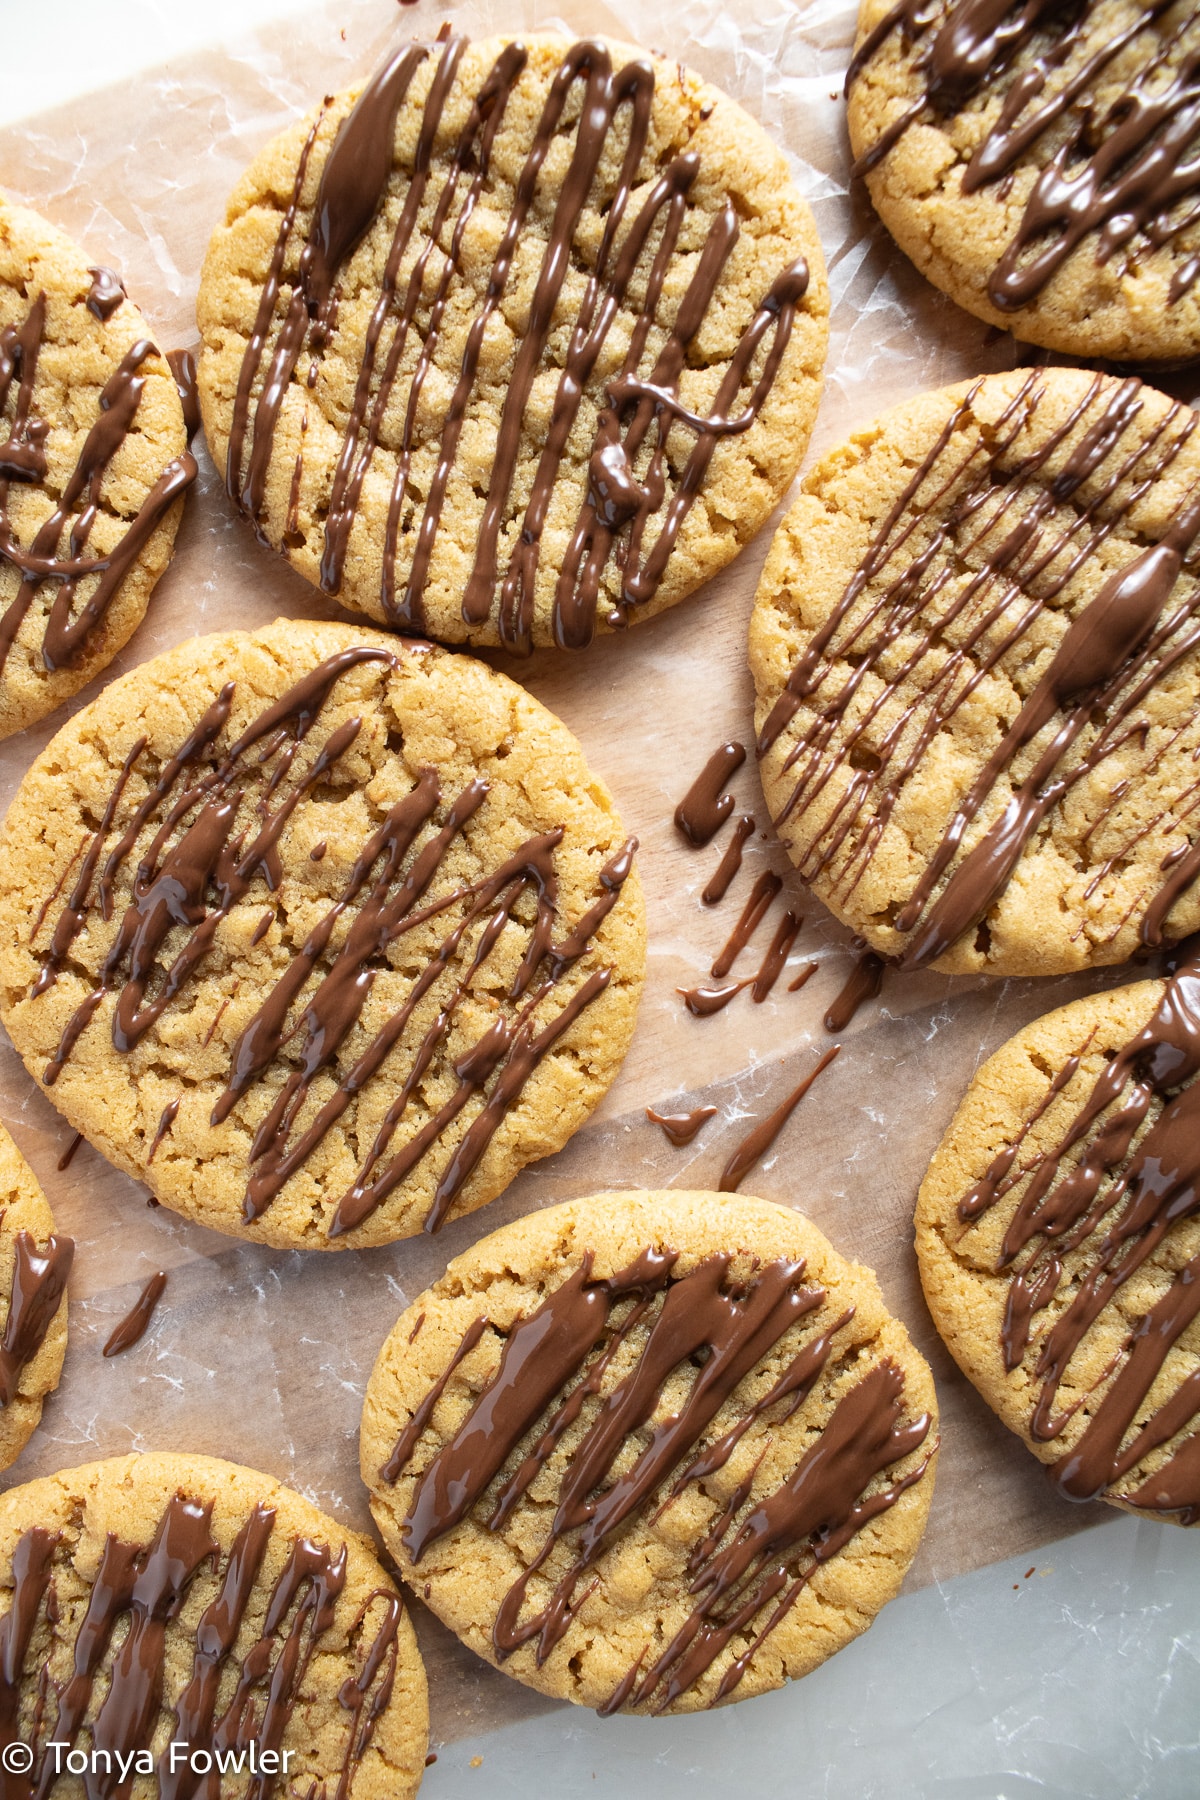 Chocolate drizzled cookies on wax paper.